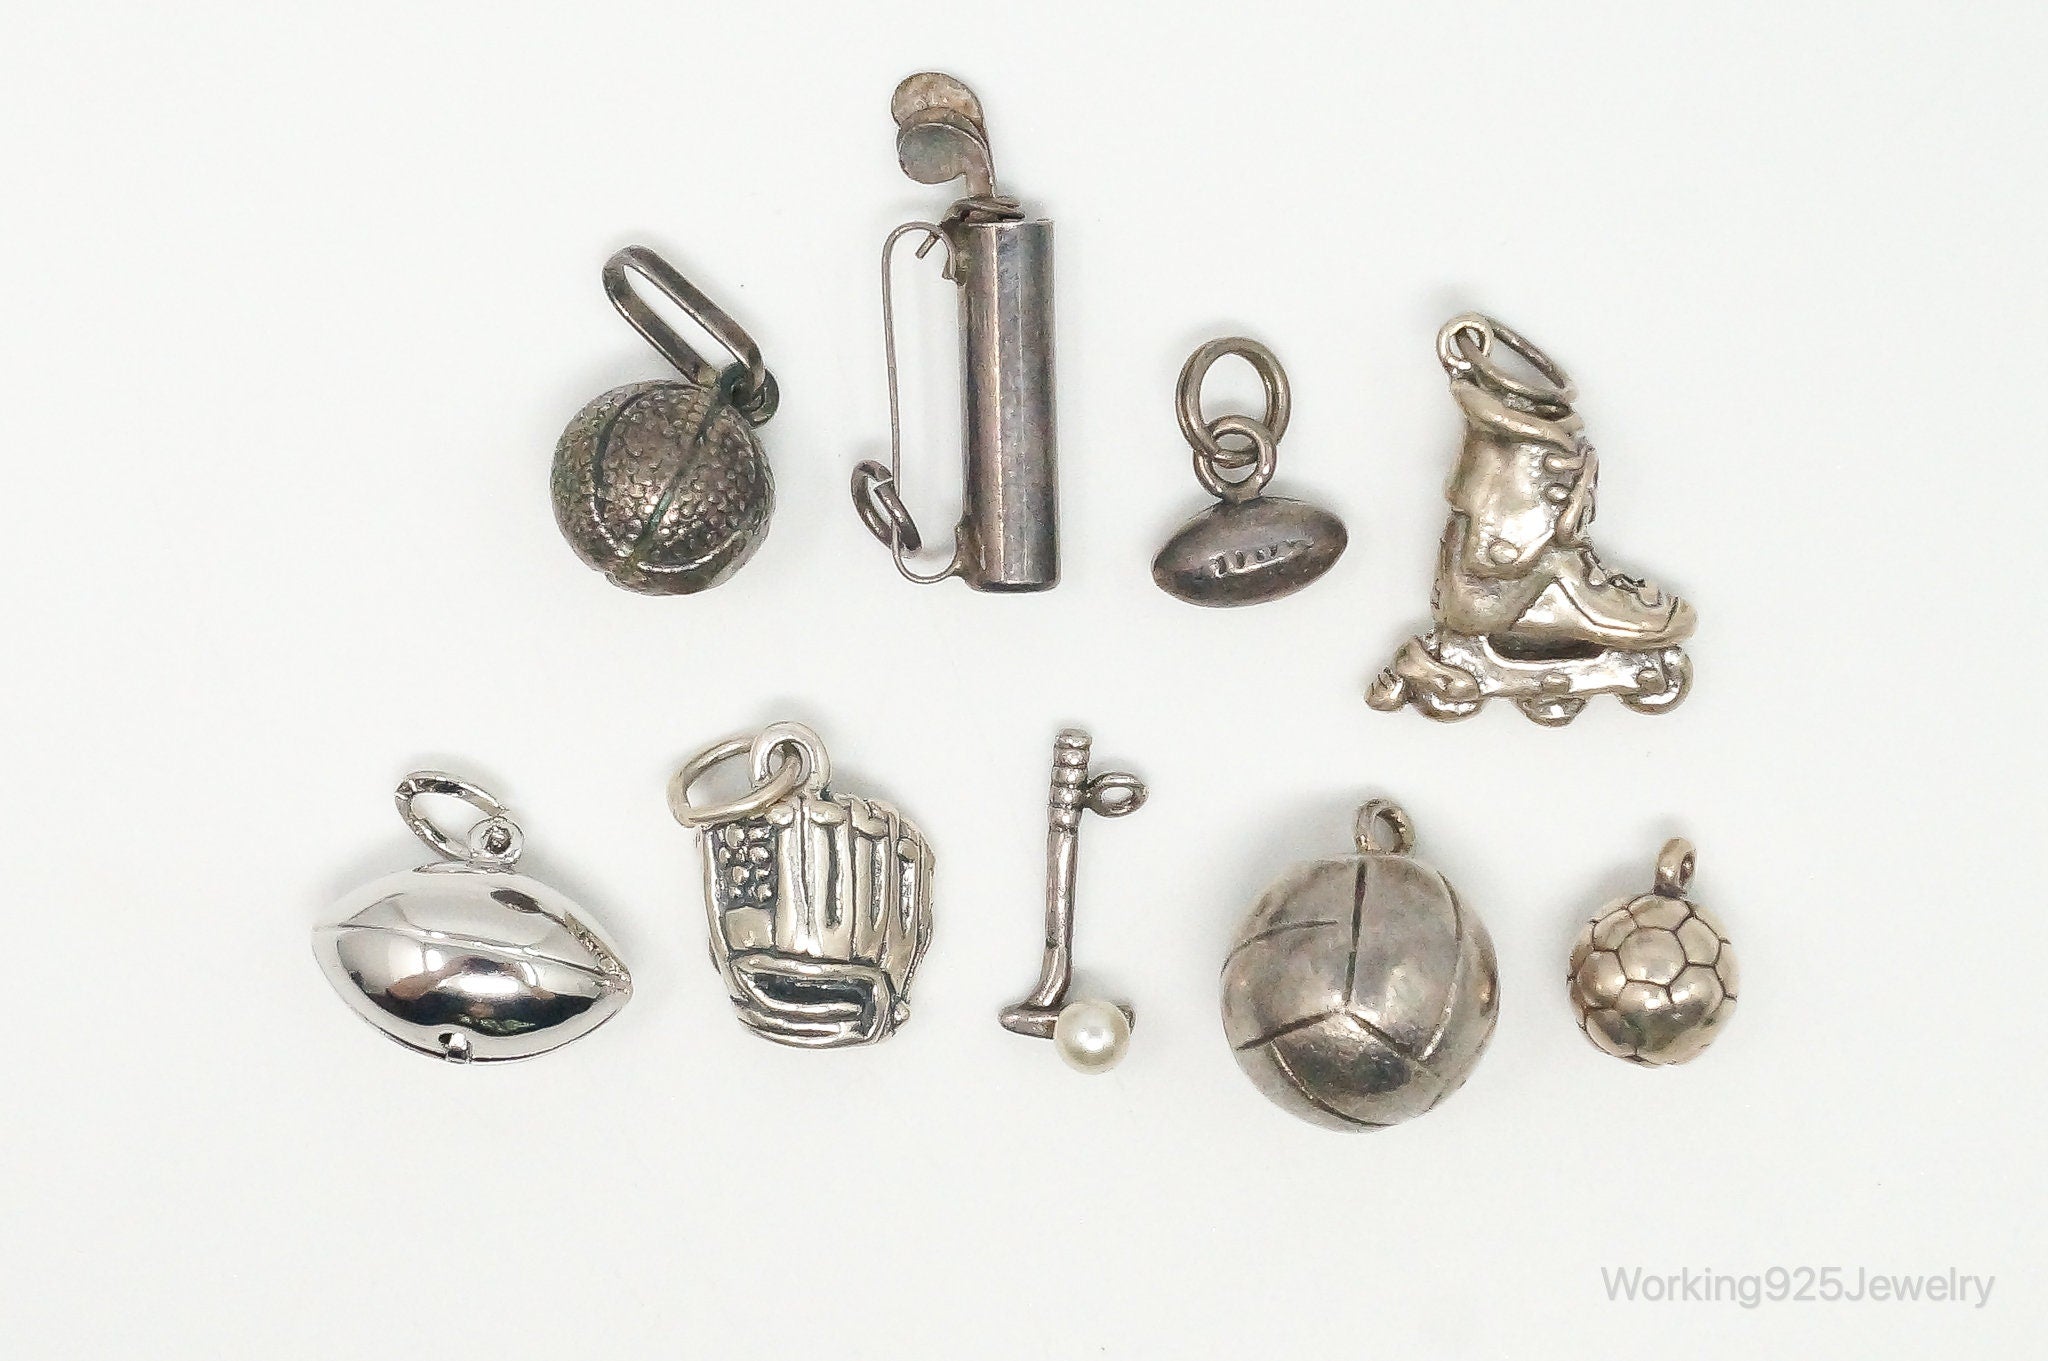 Vintage Sports Hobbies Sterling Silver Charms Lot